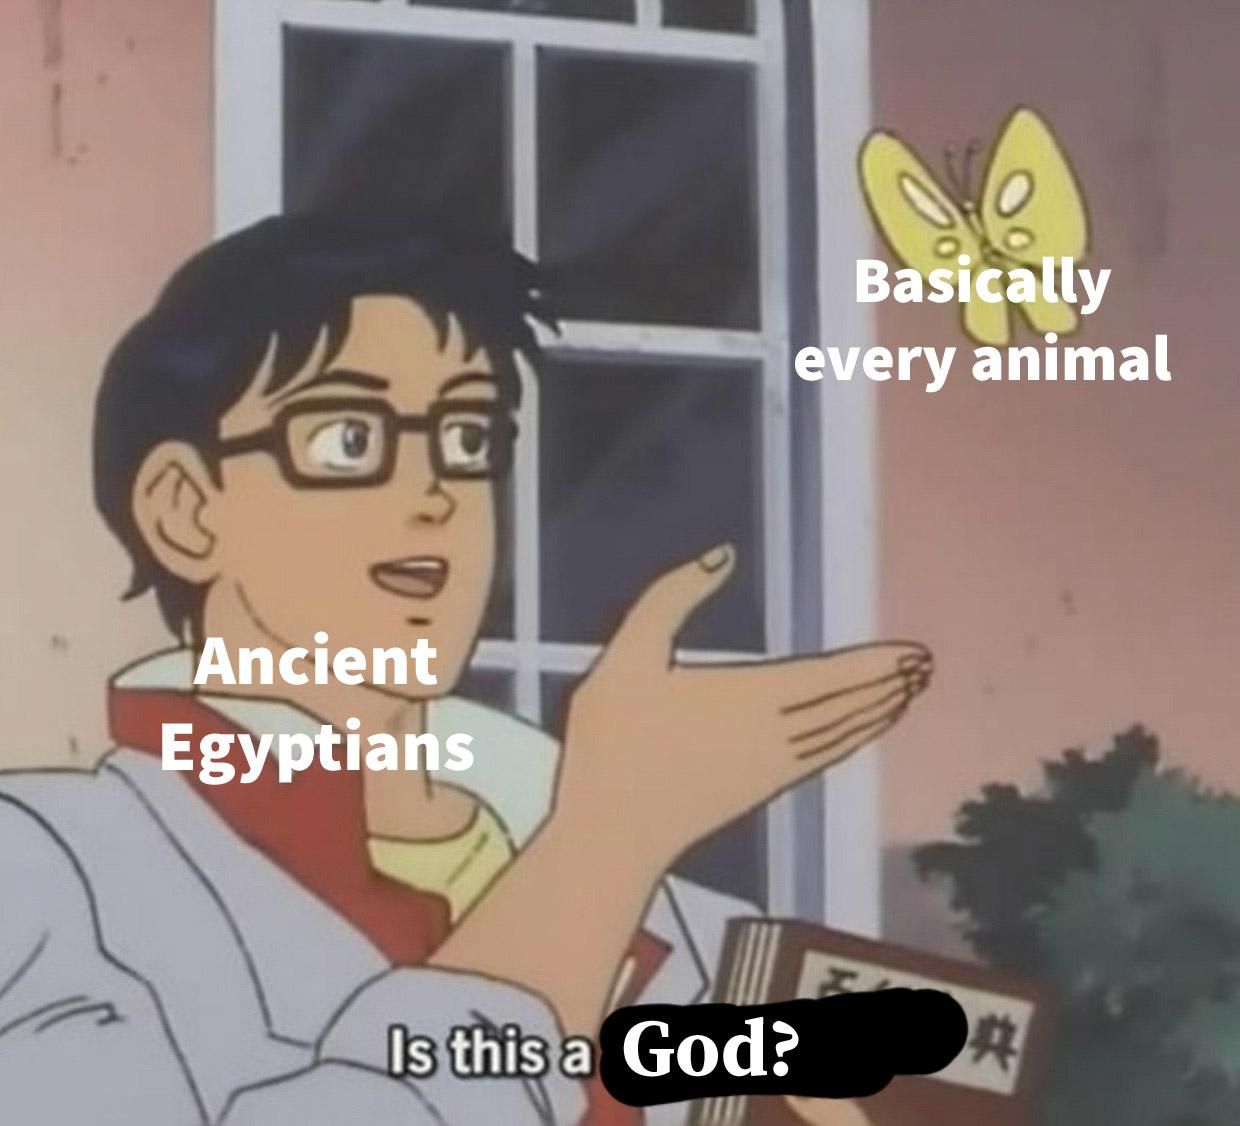 Egyptian Gods are the most badass, change my mind.